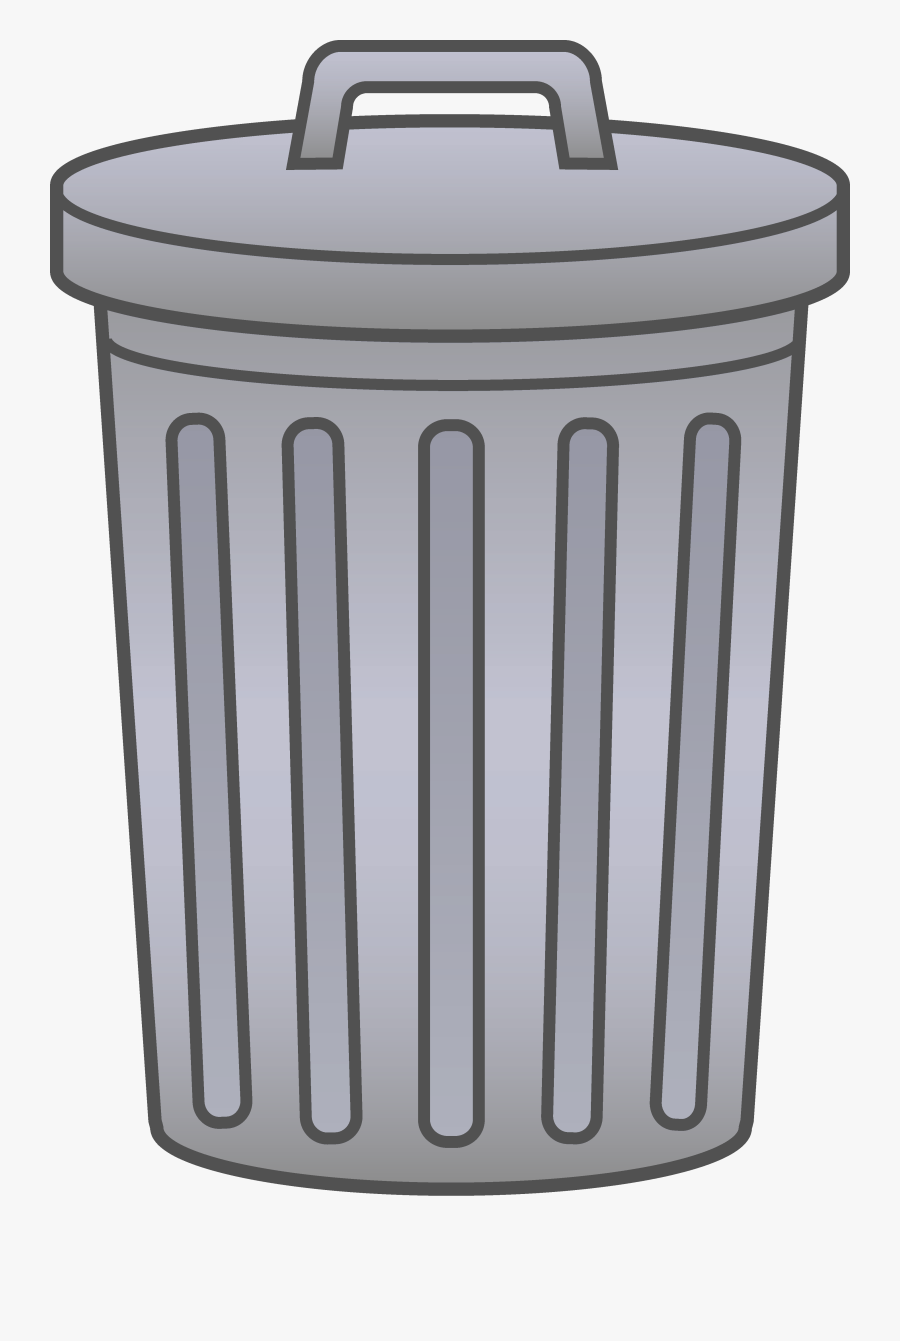 Garbage Cliparts - Trash Can Clipart Png , Free Transparent Clipart